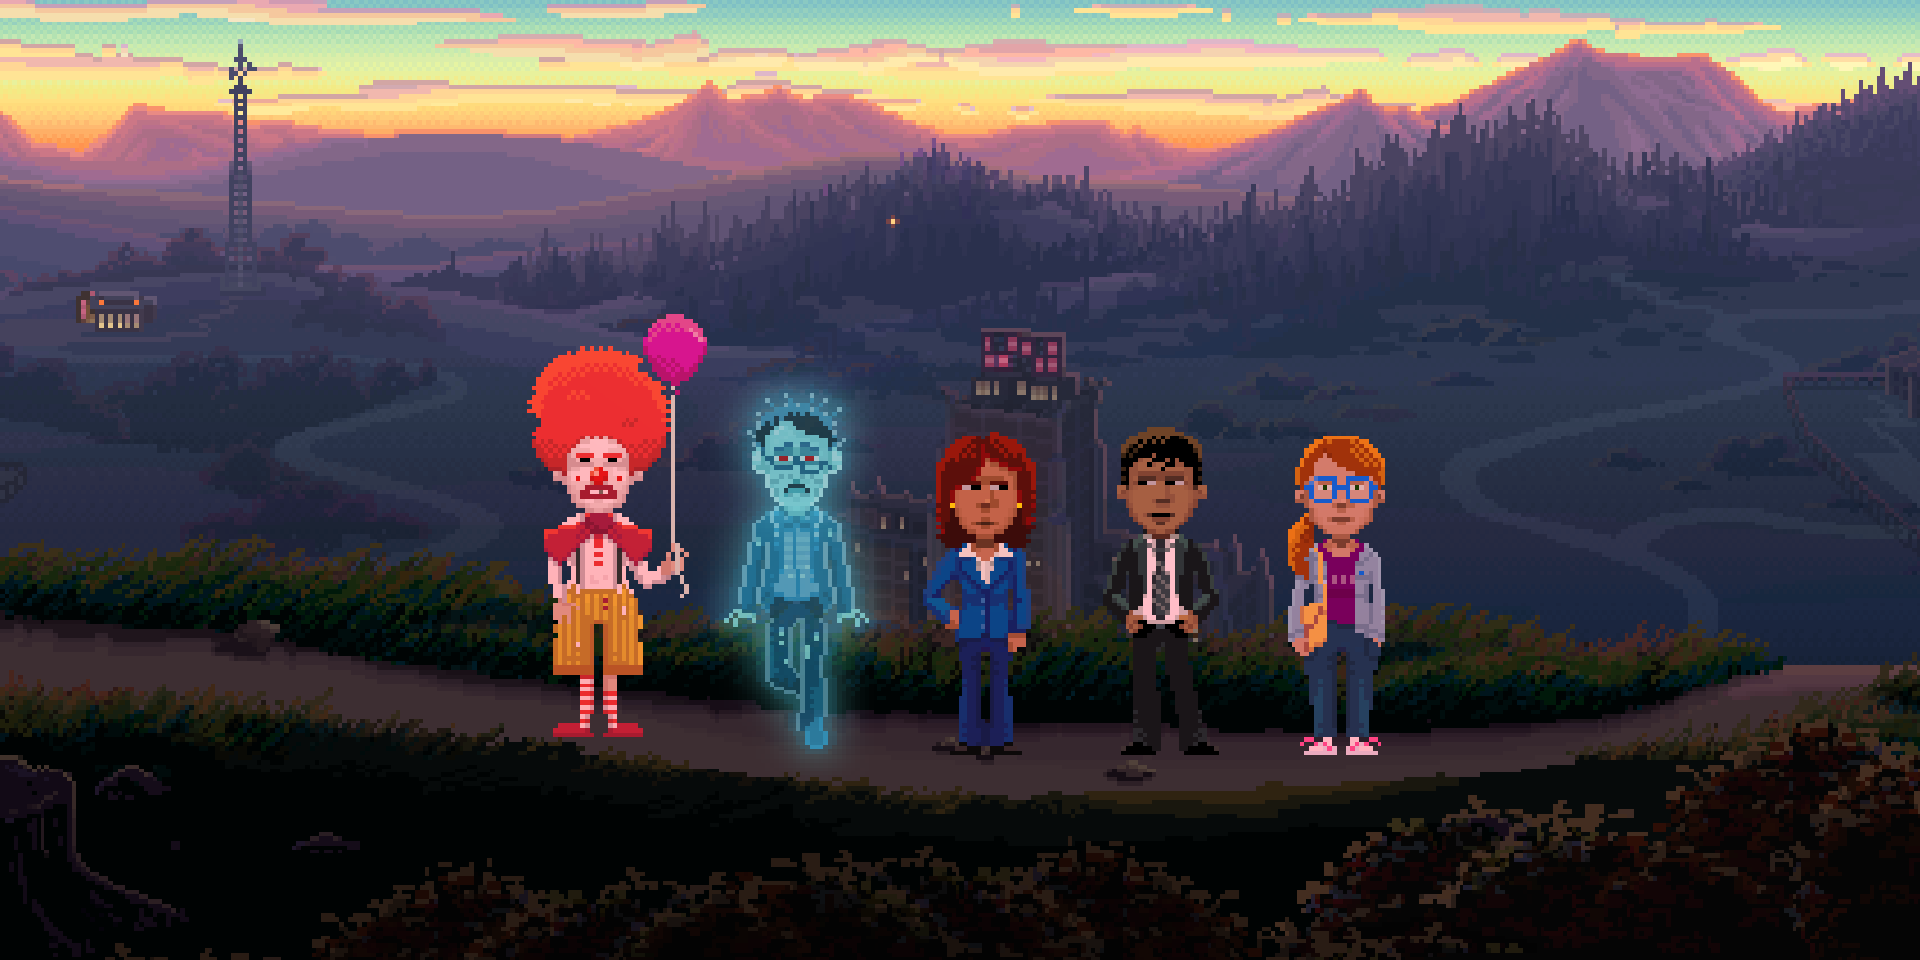 An image of Thimbleweed Park's cast.